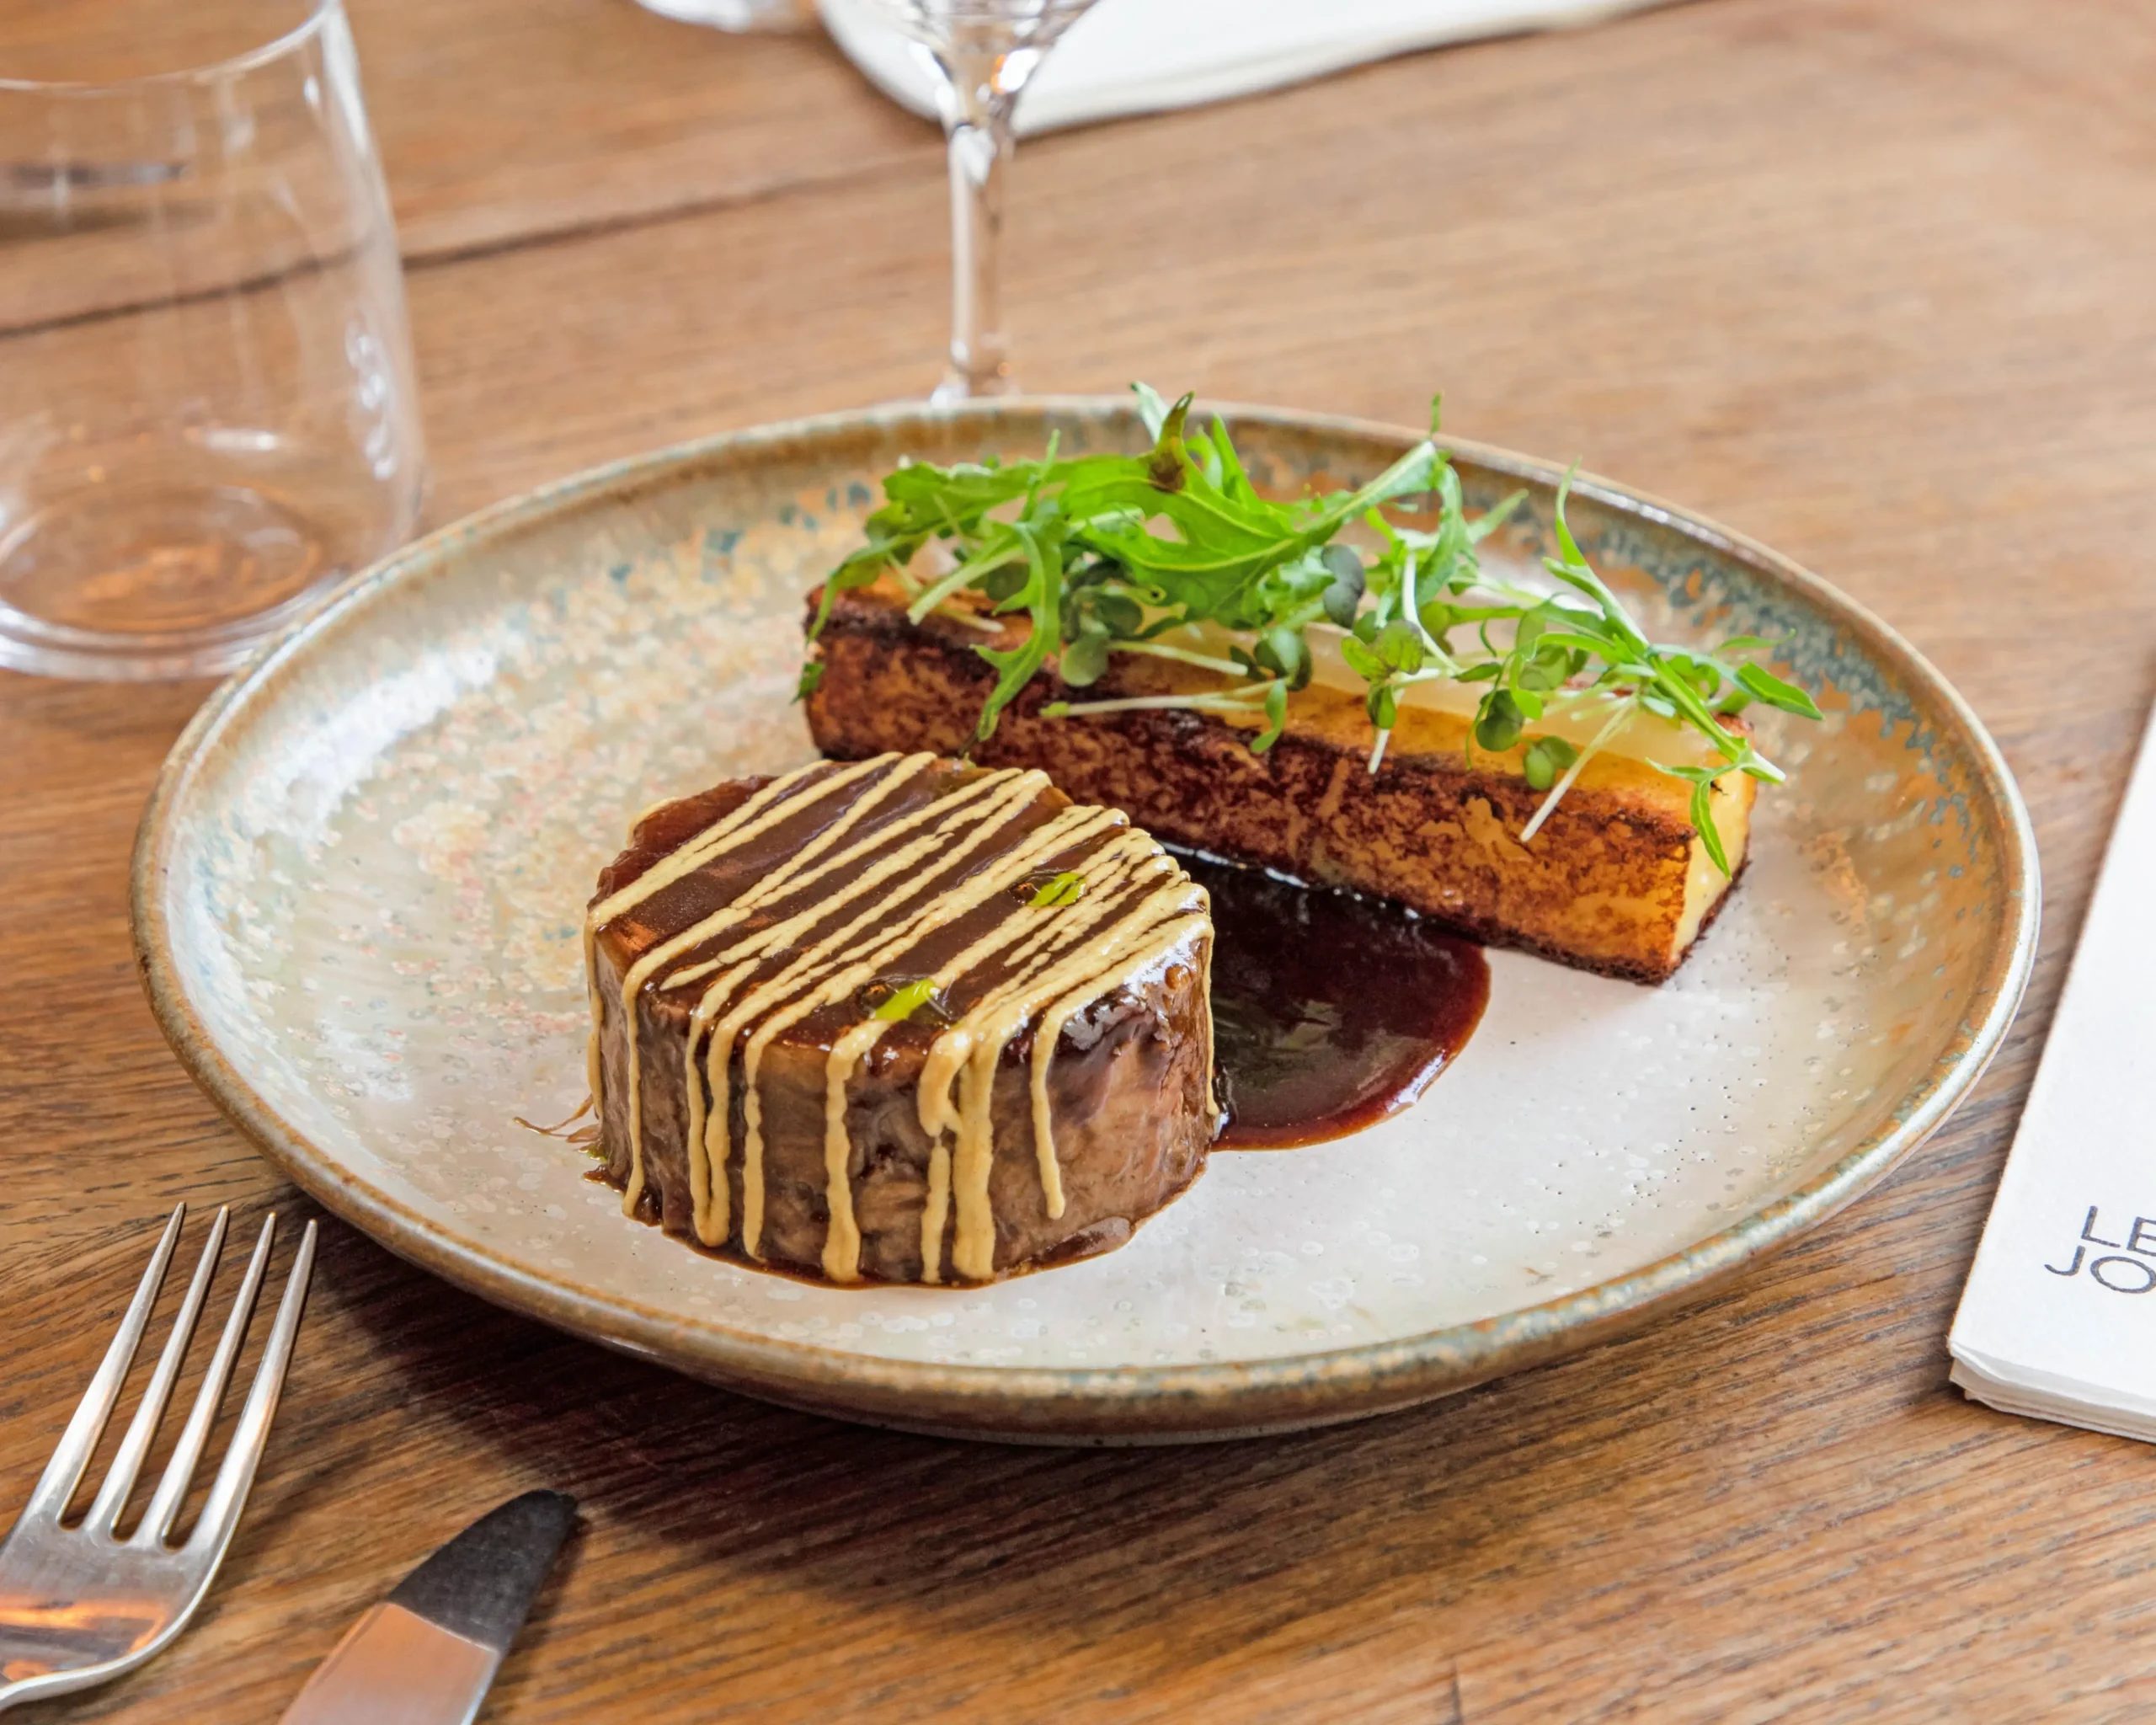 A plate of meat dish with garnish on a wooden table at Le Jourdain, a French bistro in Paris.